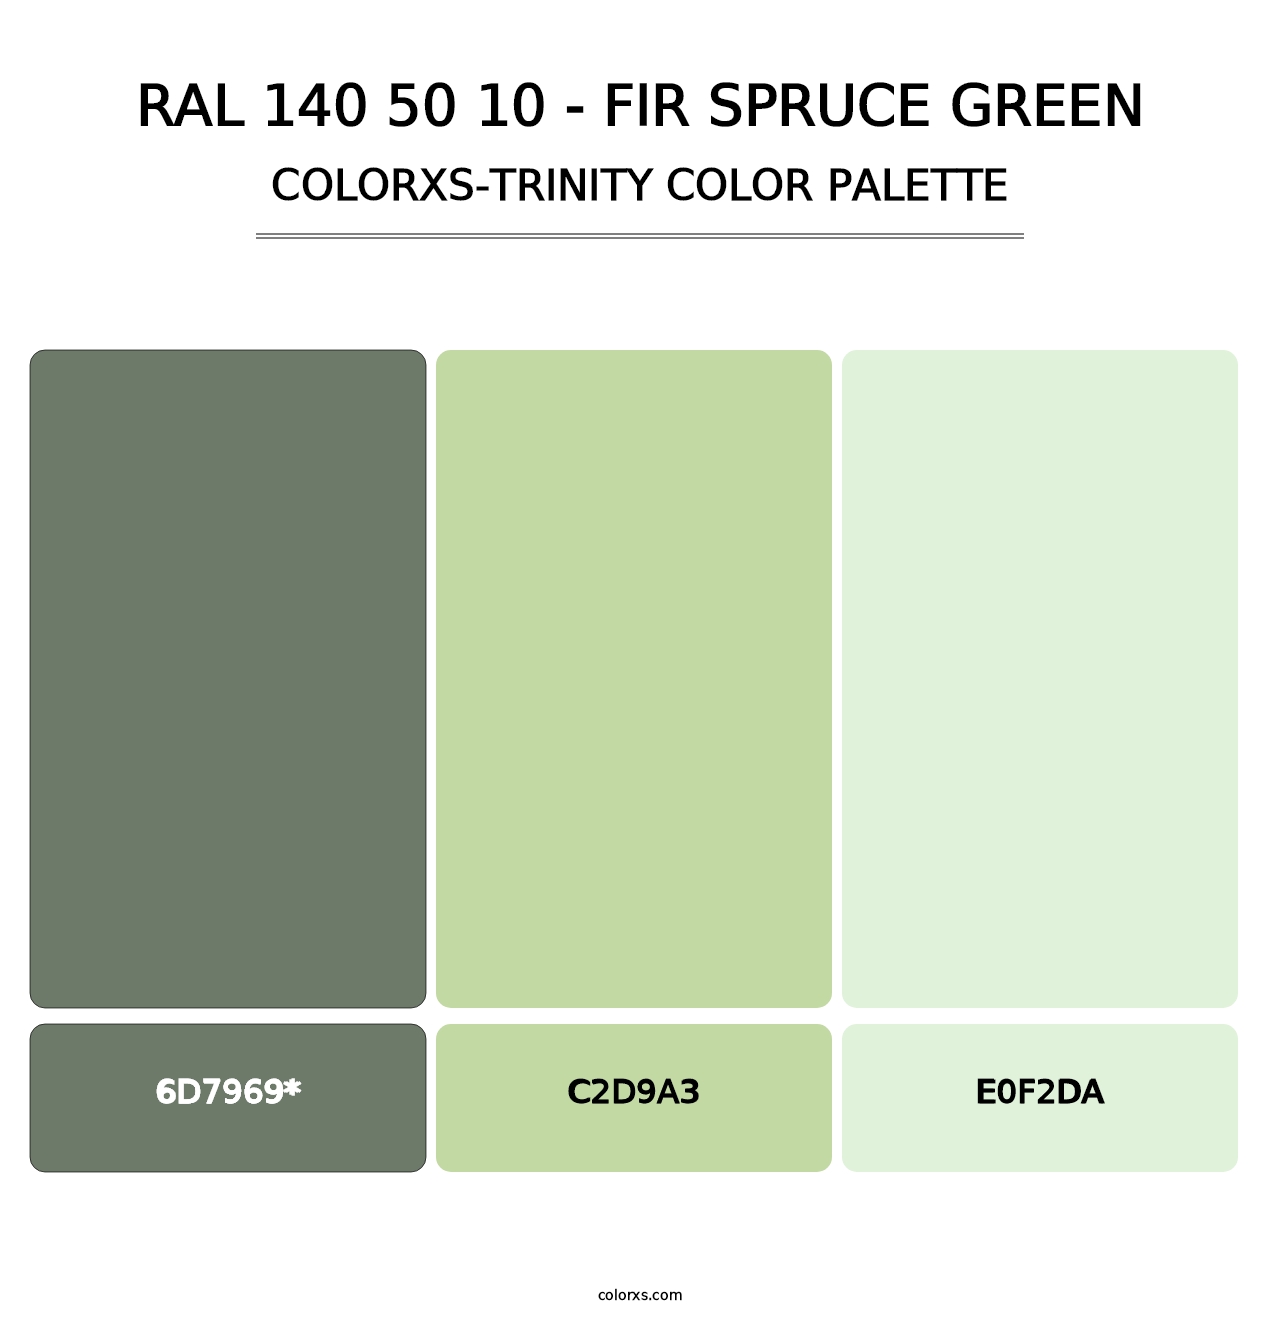 RAL 140 50 10 - Fir Spruce Green - Colorxs Trinity Palette